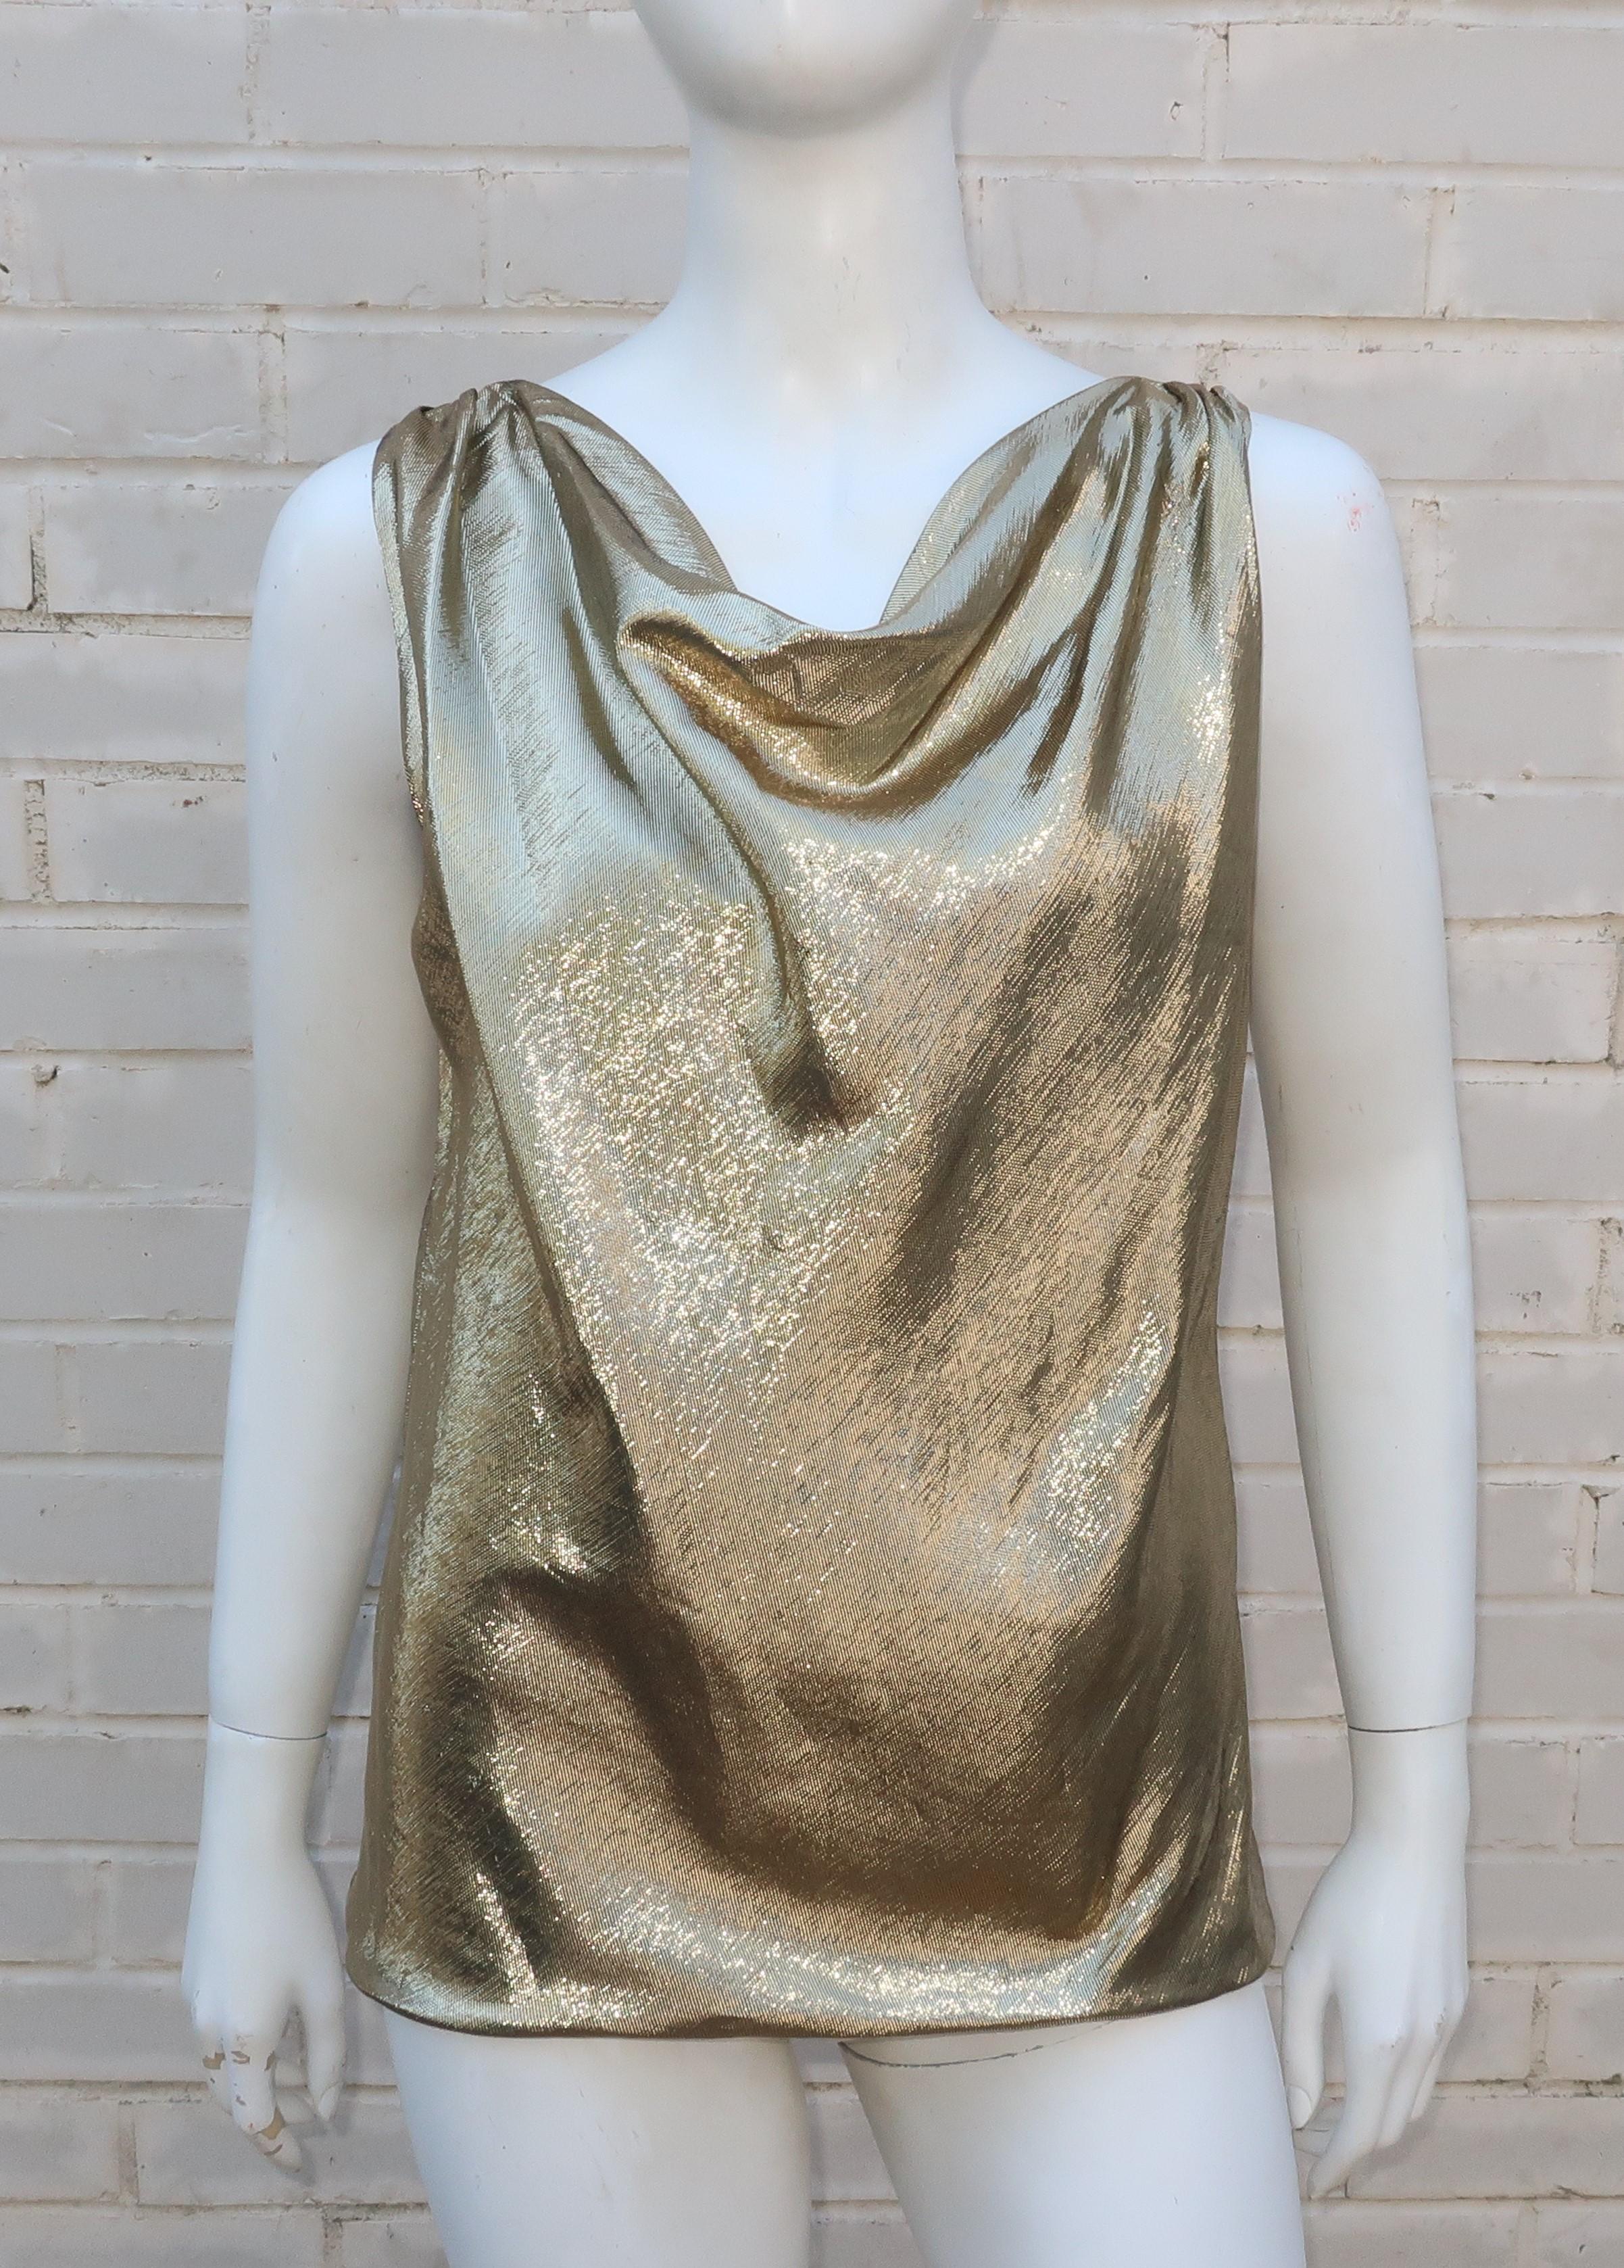 A period perfect 1970’s draped silk blend gold lamé top that has stand alone style or serves well as a shell for pairing with jackets.  Pull over construction with a singular amber rhinestone button at the back and well made with lining and a fabric